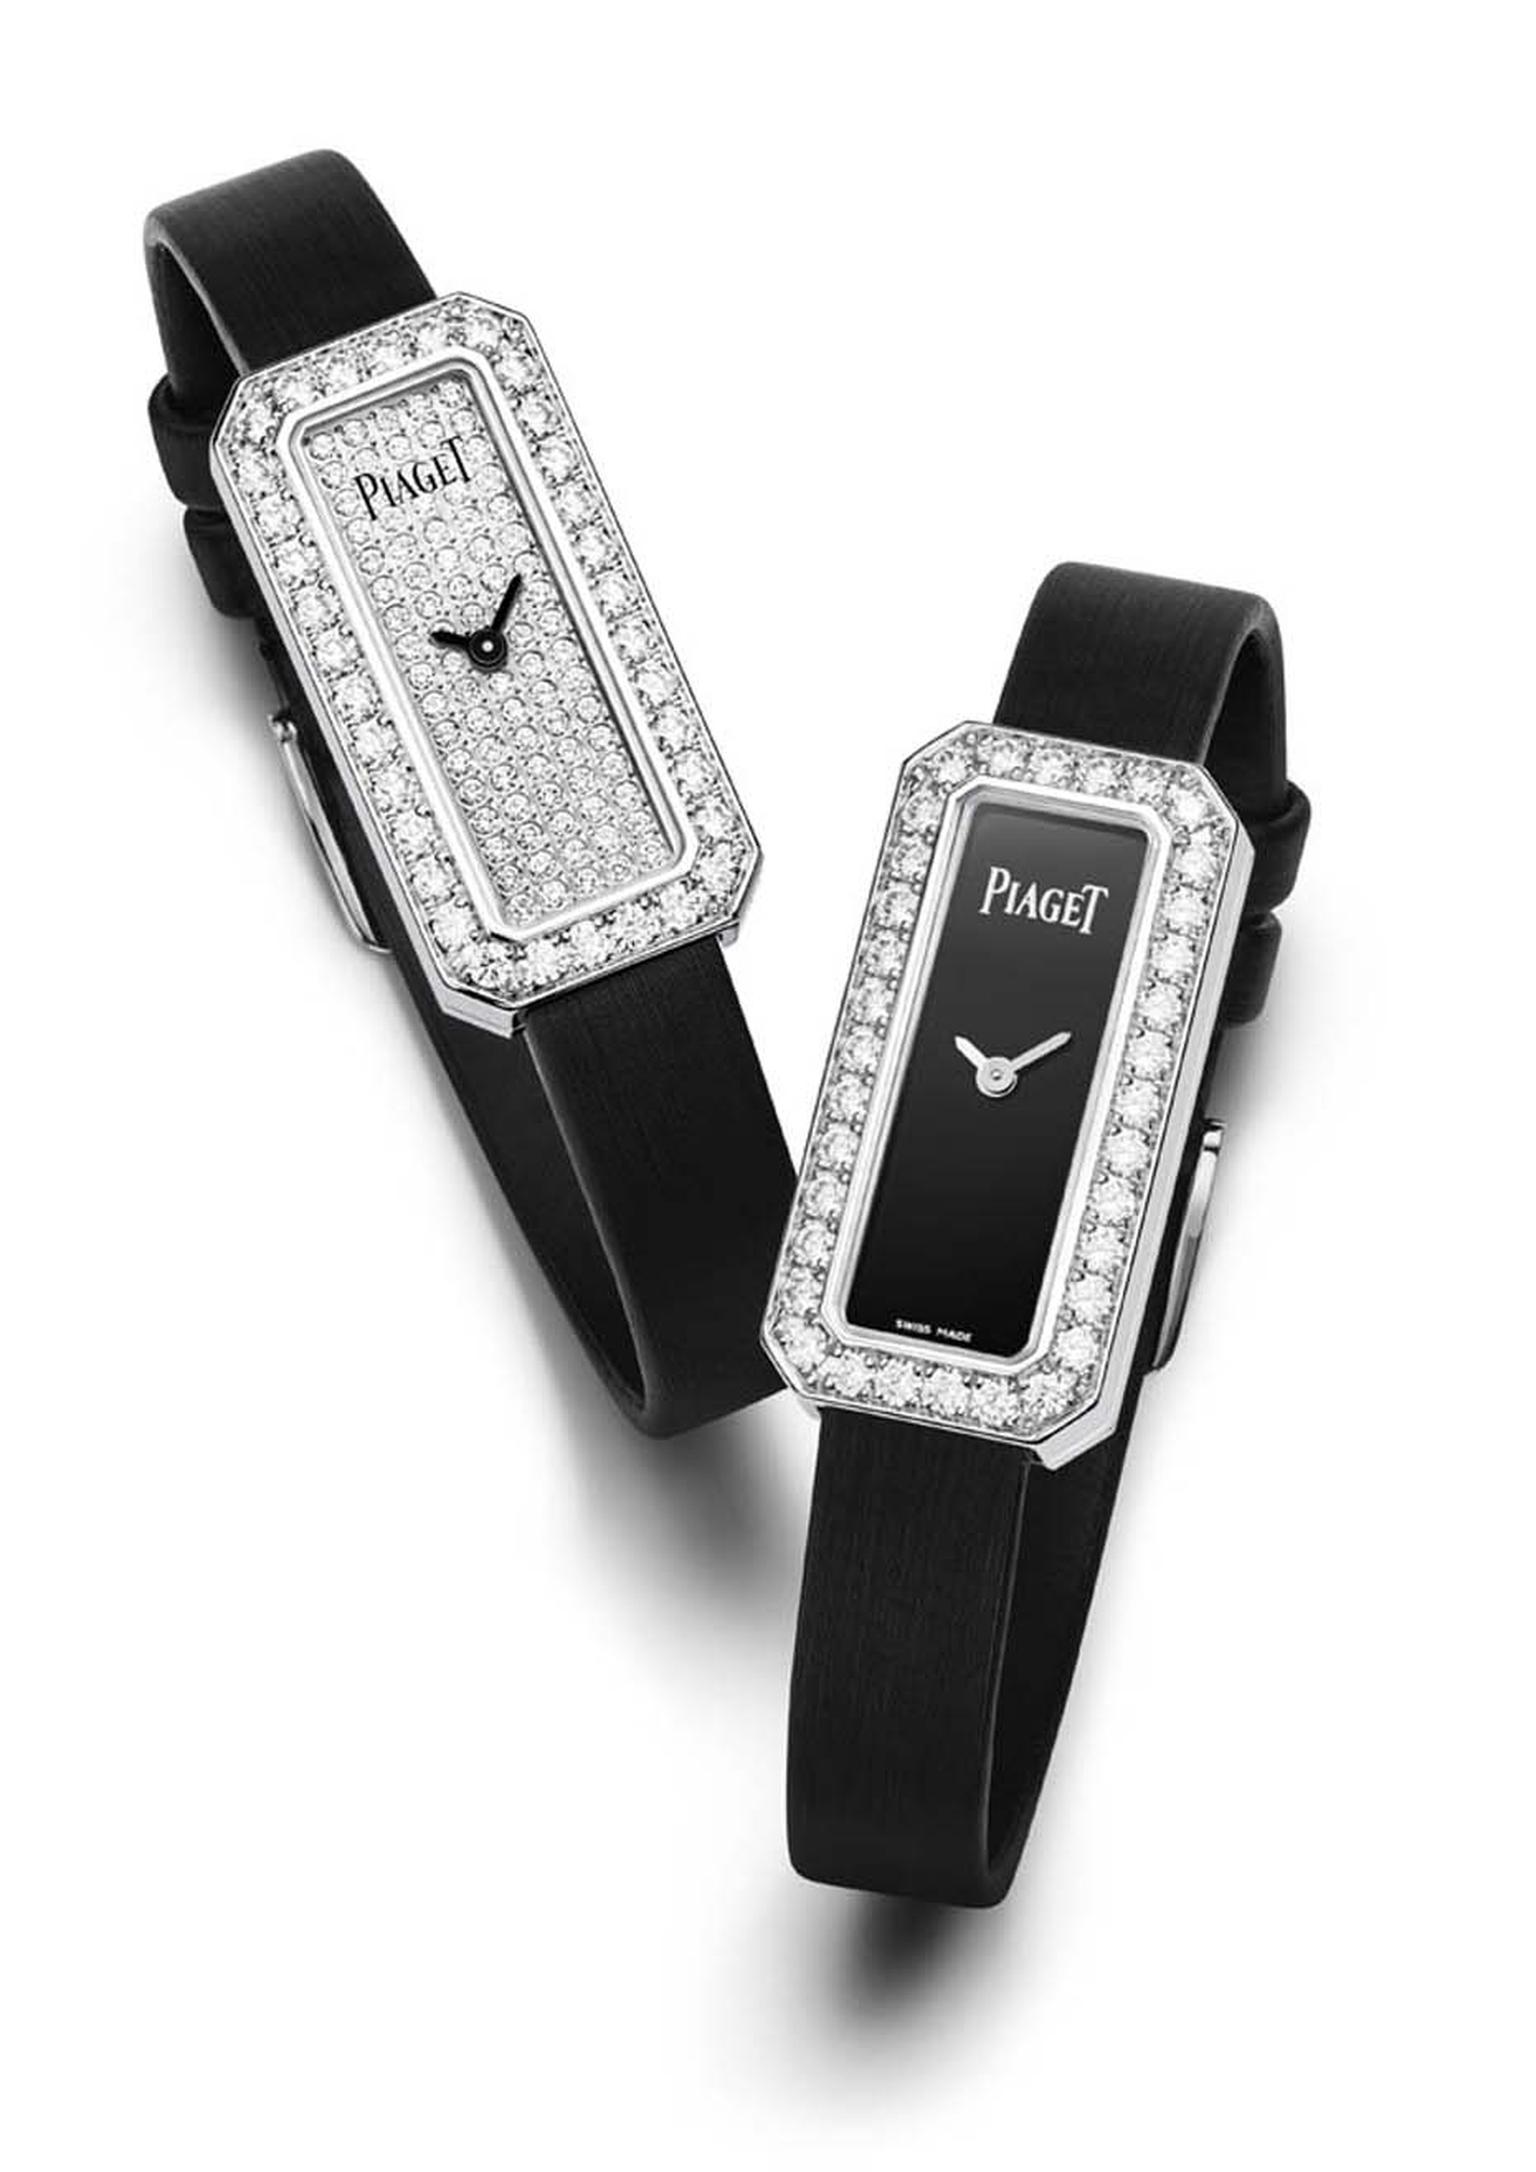 Crafted in white gold and set with over 1.00ct of brilliant-cut diamonds on the bezel, the new, rectangular-shaped Piaget Limelight Diamonds watches is presented in two versions: with a sleek black lacquer dial and fully paved with diamonds.